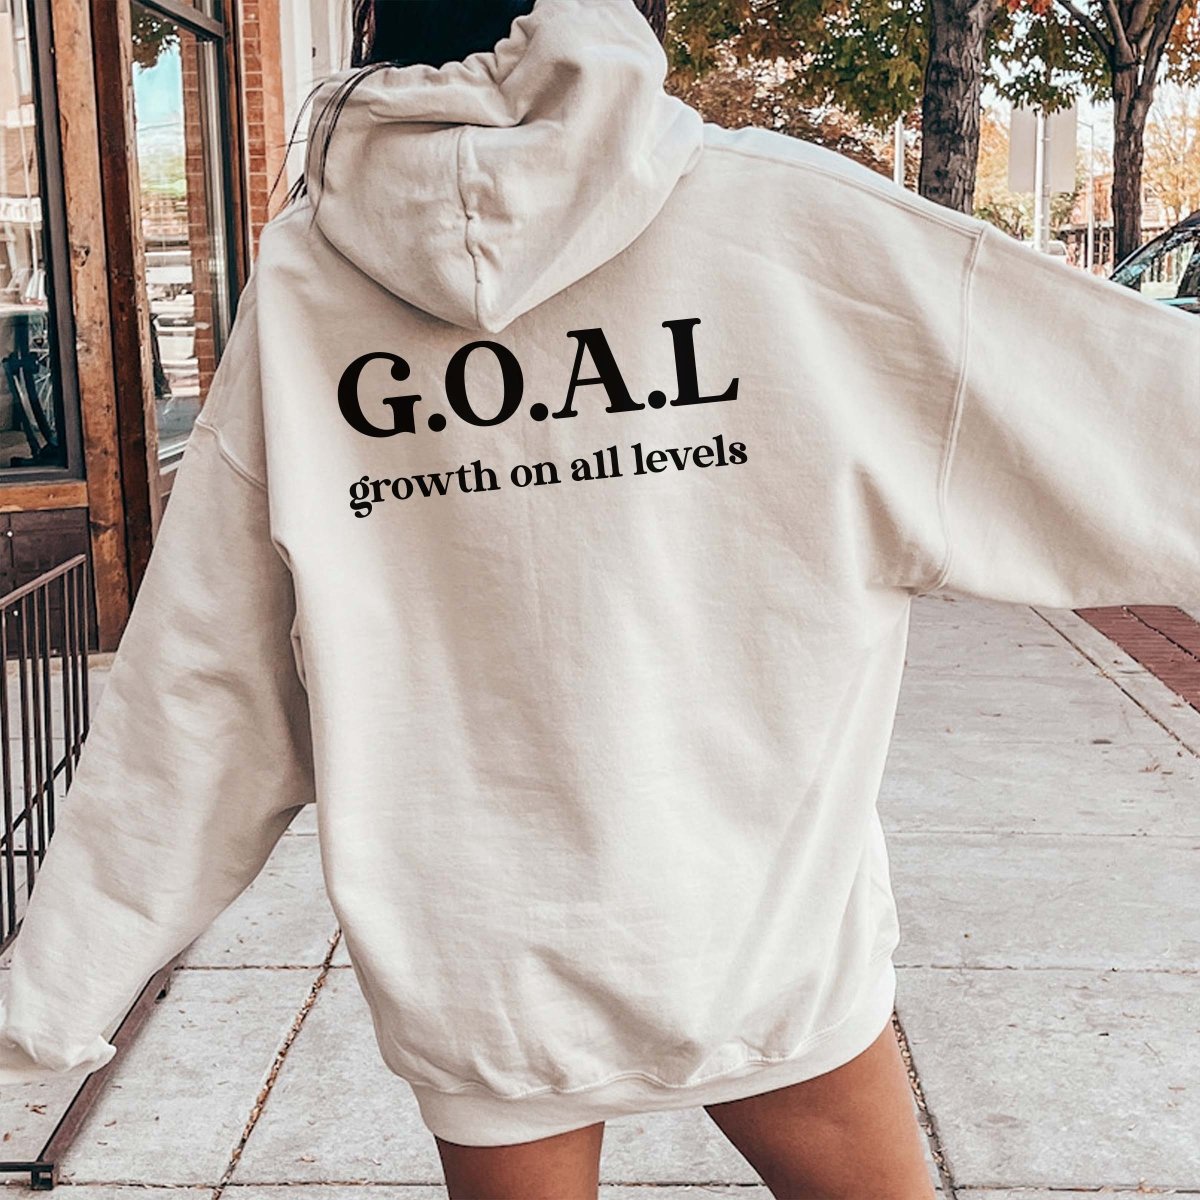 G.O.A.L.(growth on all levels) | Back Design hooded Sweatshirt - Limeberry Designs